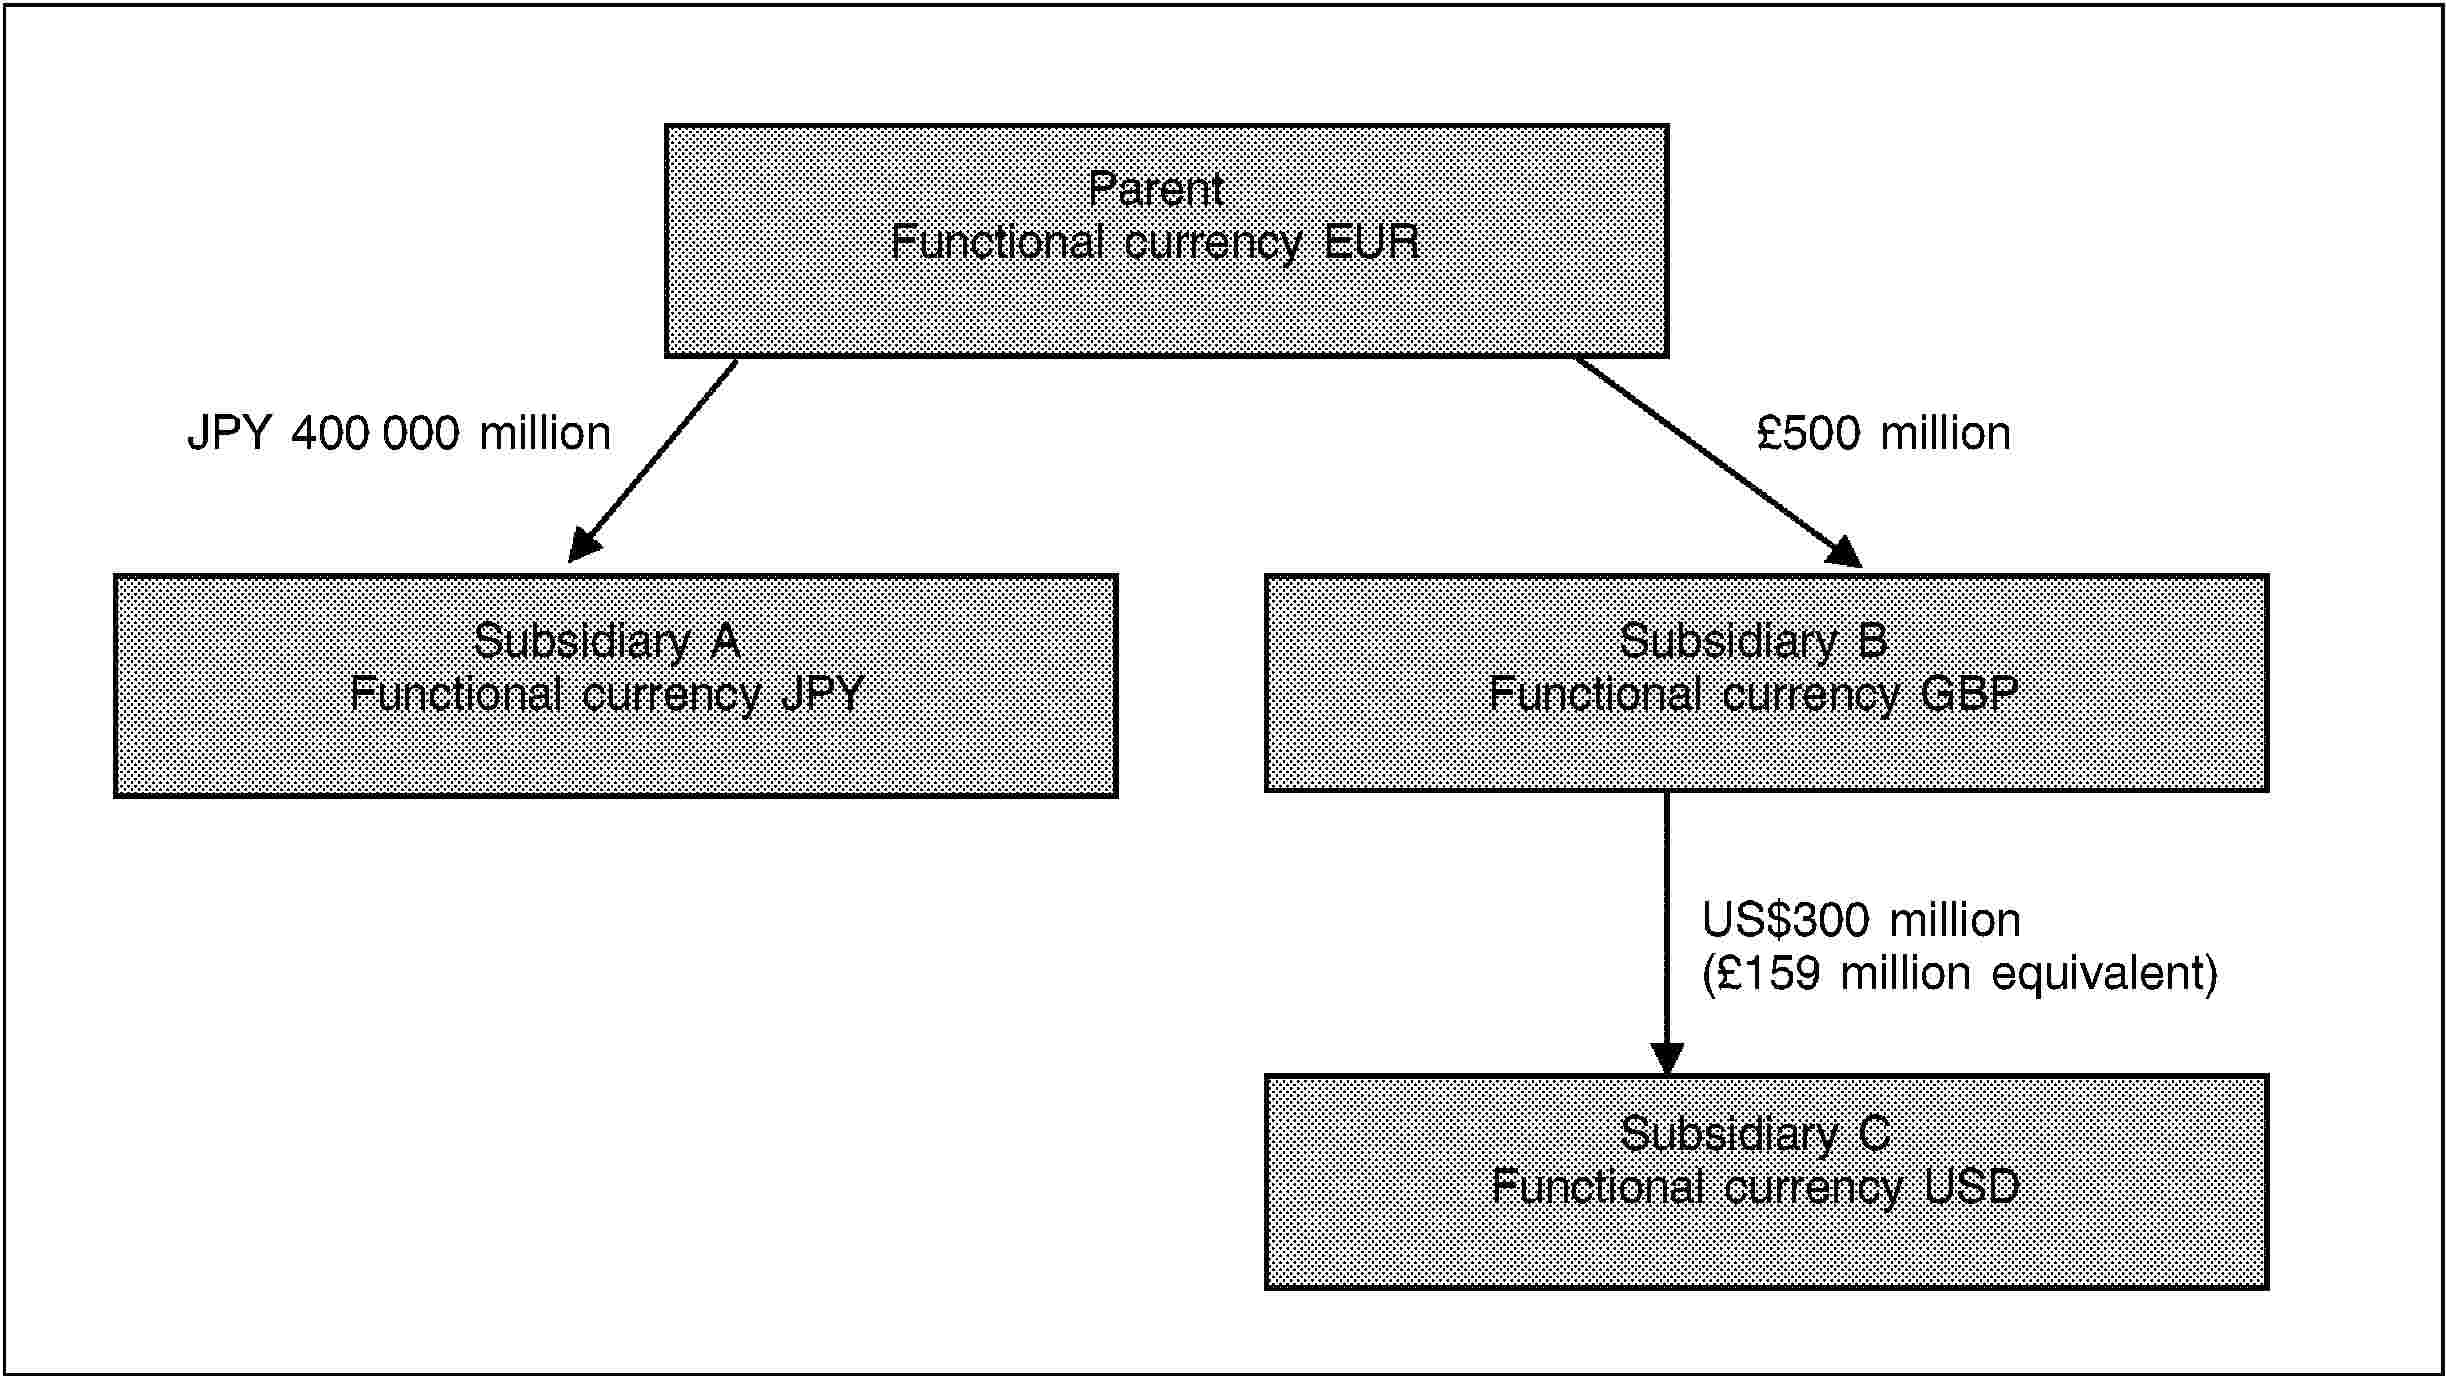 ParentFunctional currency EURJPY 400 000 million£500 millionSubsidiary AFunctional currency JPYSubsidiary BFunctional currency GBPUS$300 million(£159 million equivalent)Subsidiary CFunctional currency USD